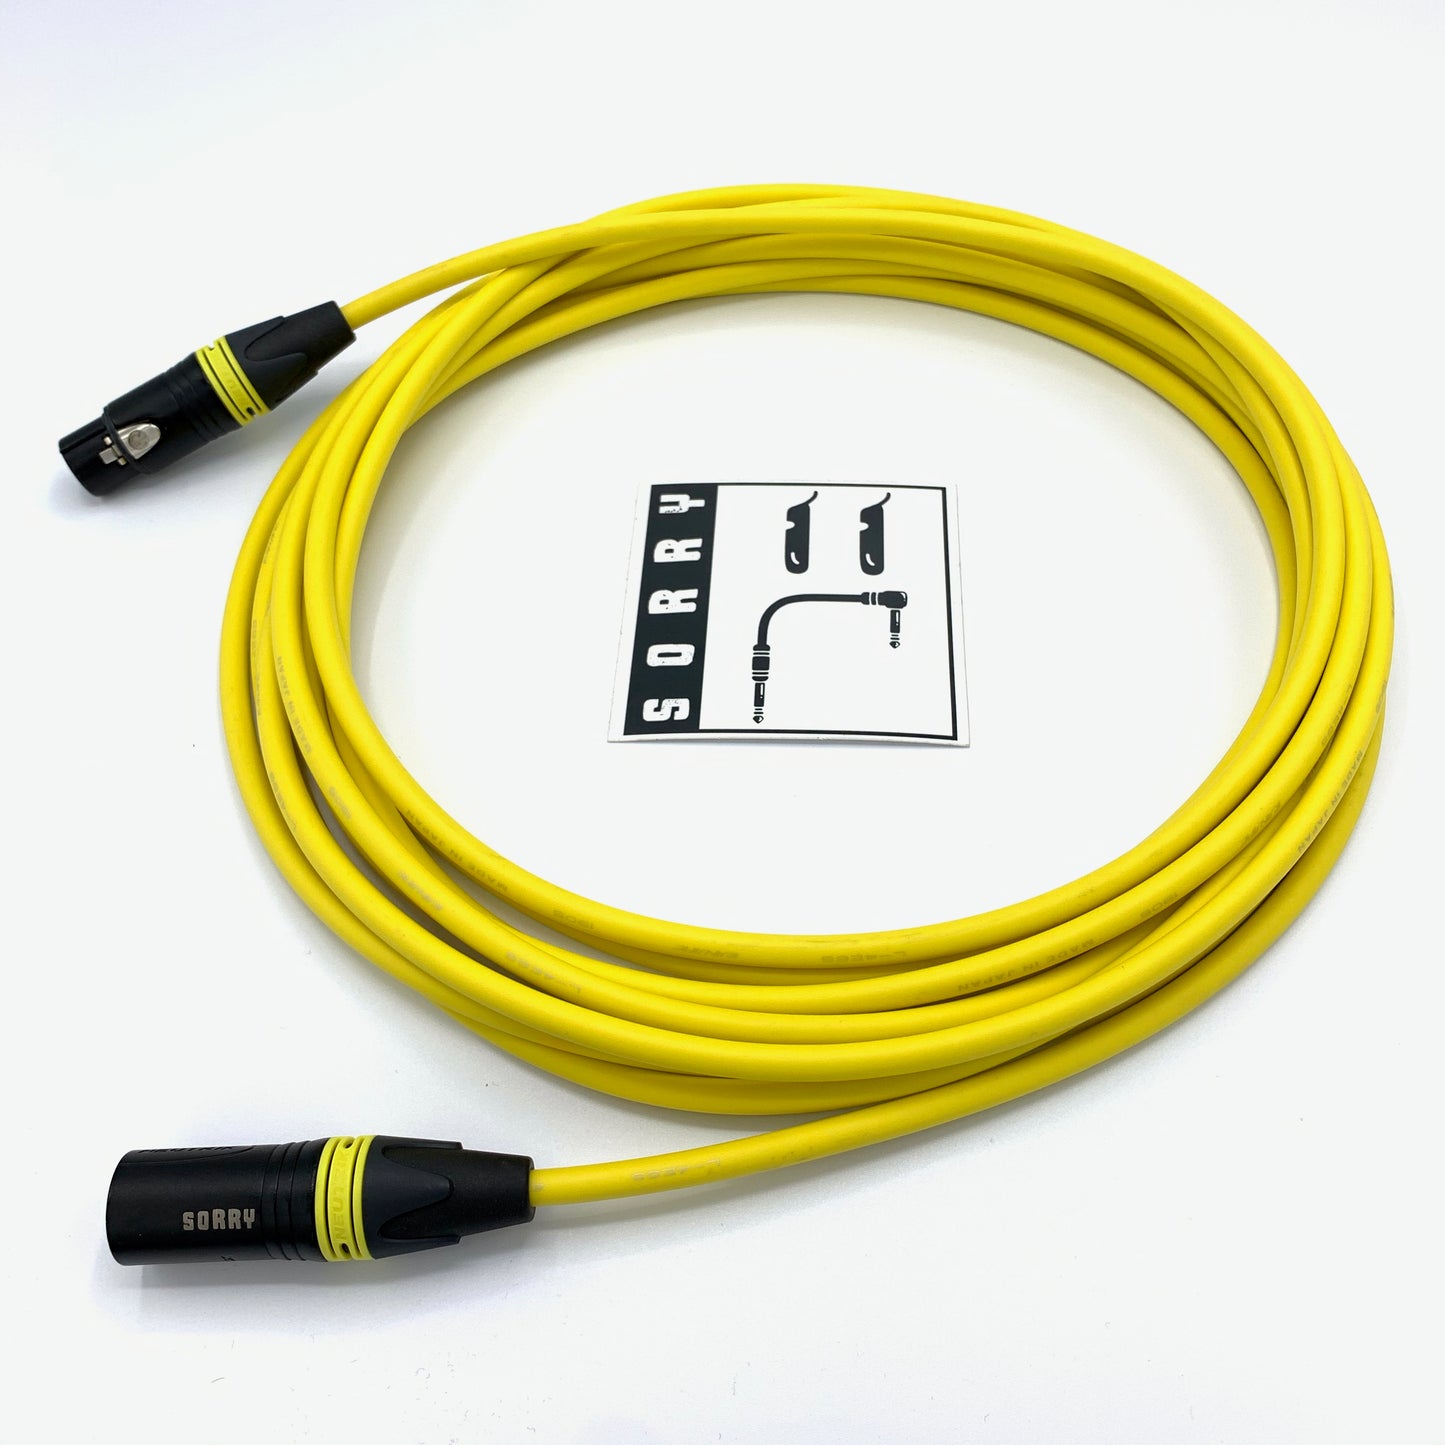 SORRY Microphone Cable - Standard Yellow